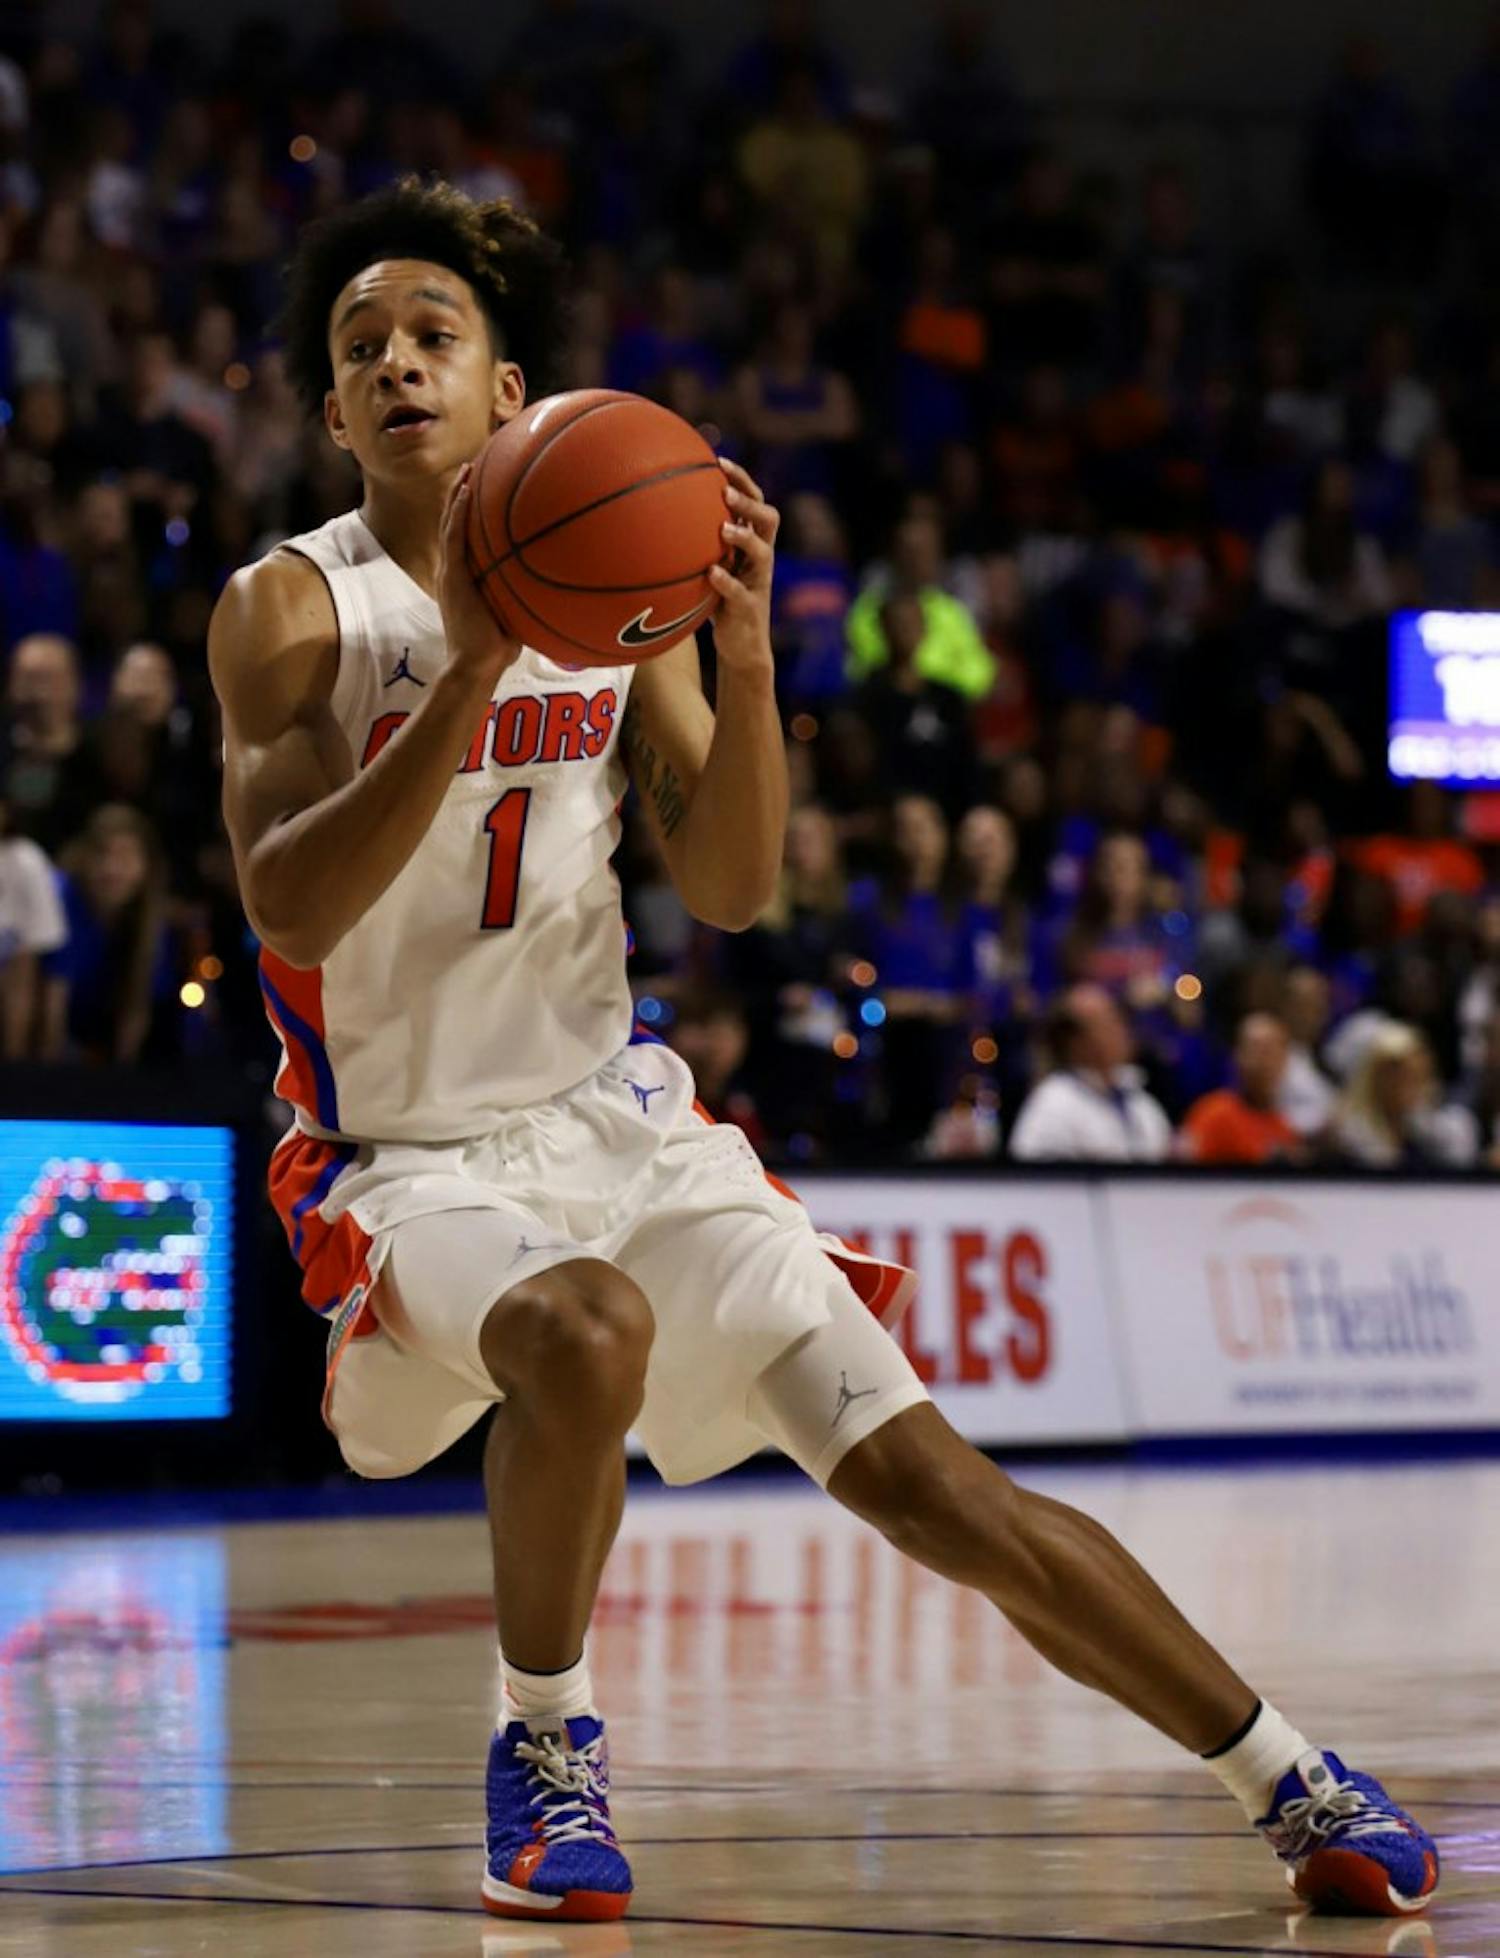 The #Gators will play two games in the Mohegan Sun at Connecticut this week to start their 2020-2021 season.